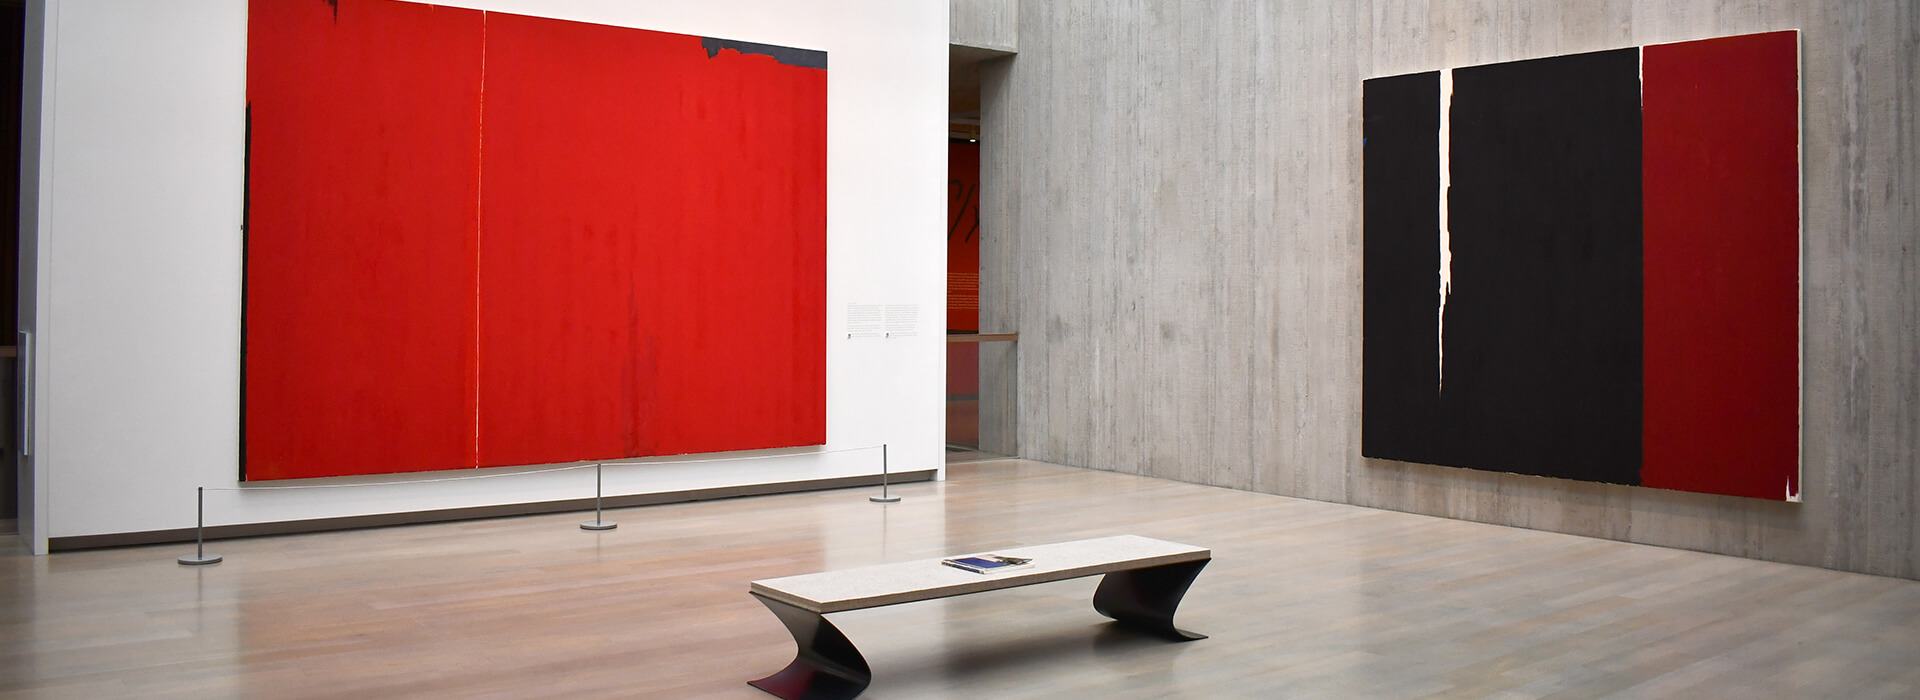 Gallery installation image with red paintings